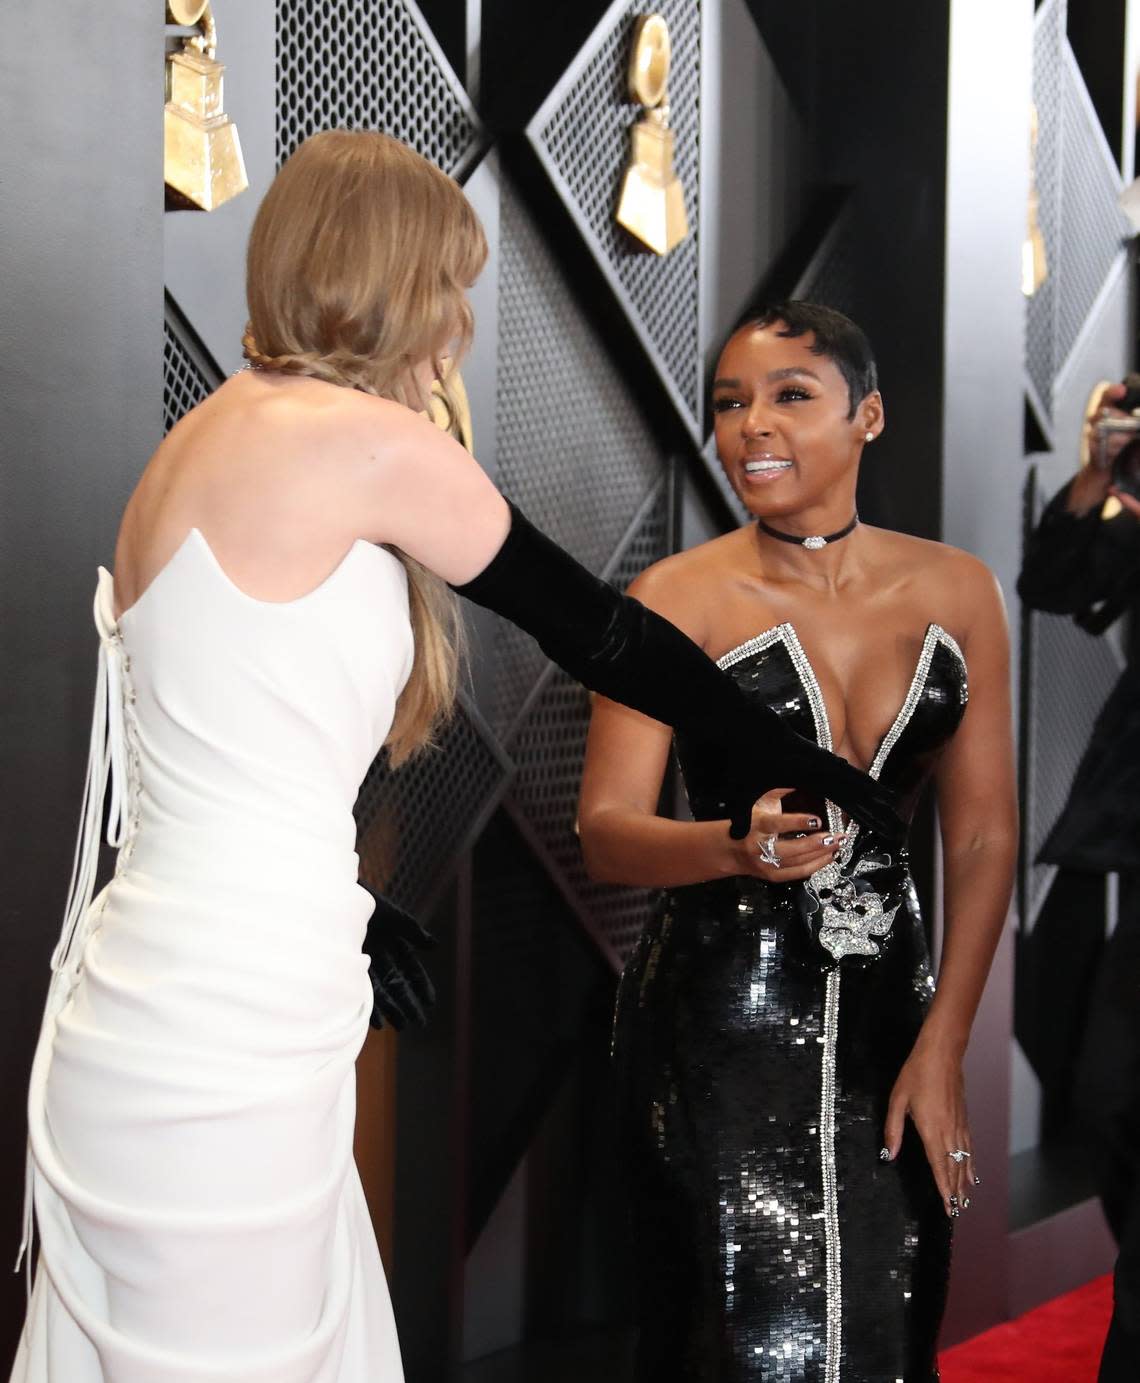 Taylor Swift and Janelle Monáe meet up on the Grammy Awards red carpet Sunday.